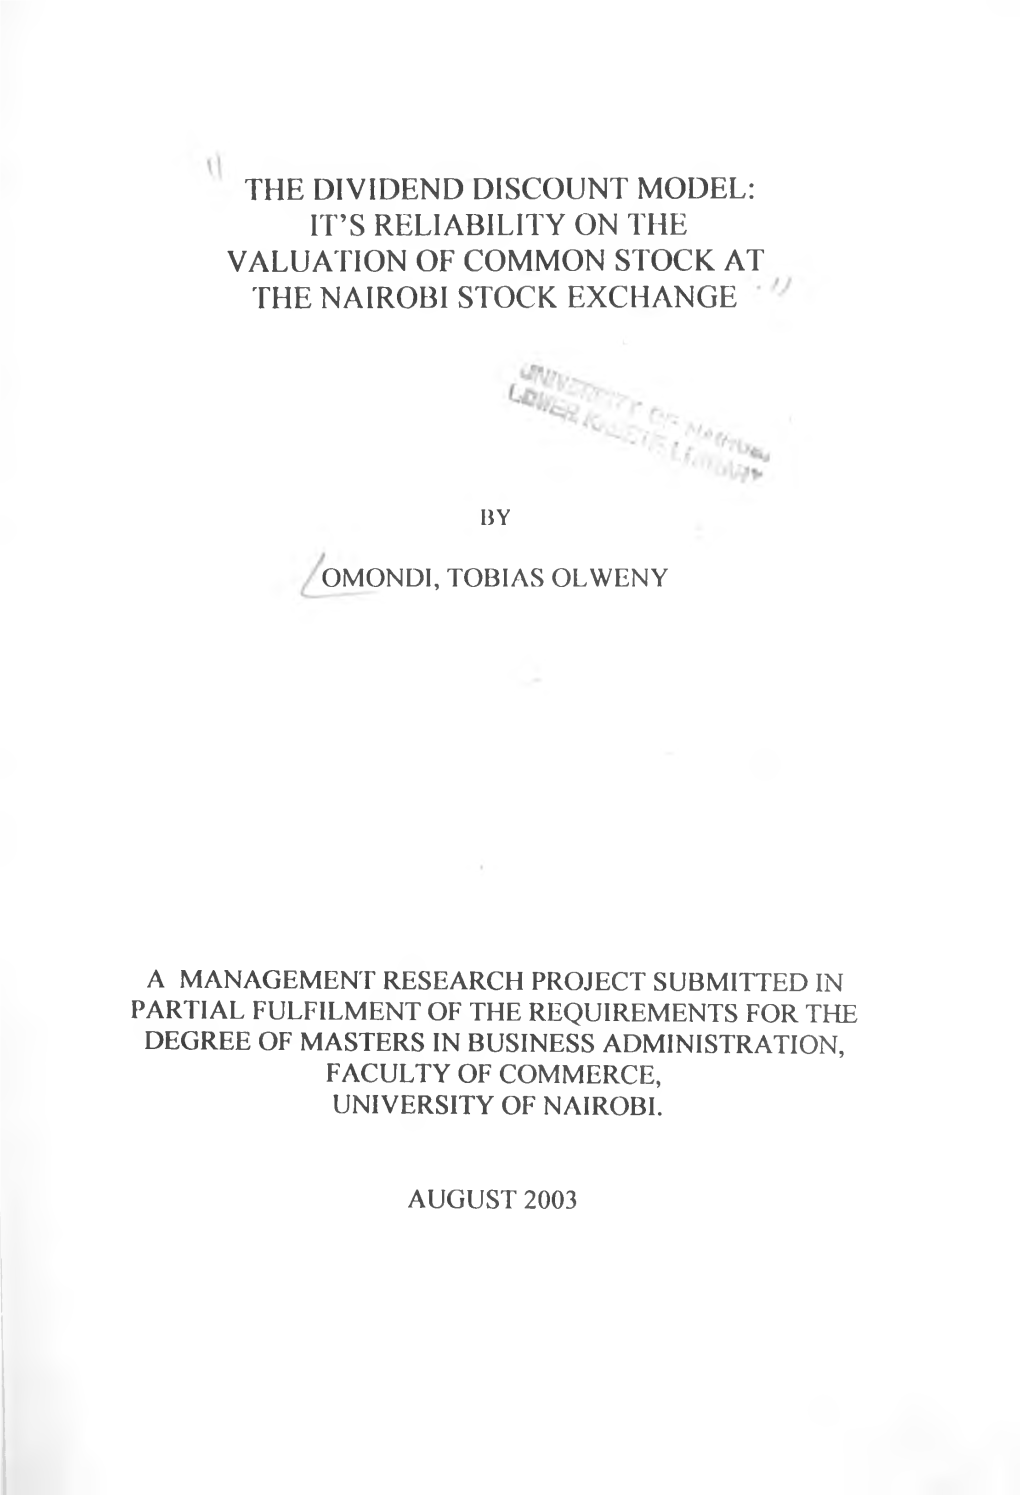 The Dividend Discount Model: It’S Reliability on the Valuation of Common Stock at the Nairobi Stock Exchange